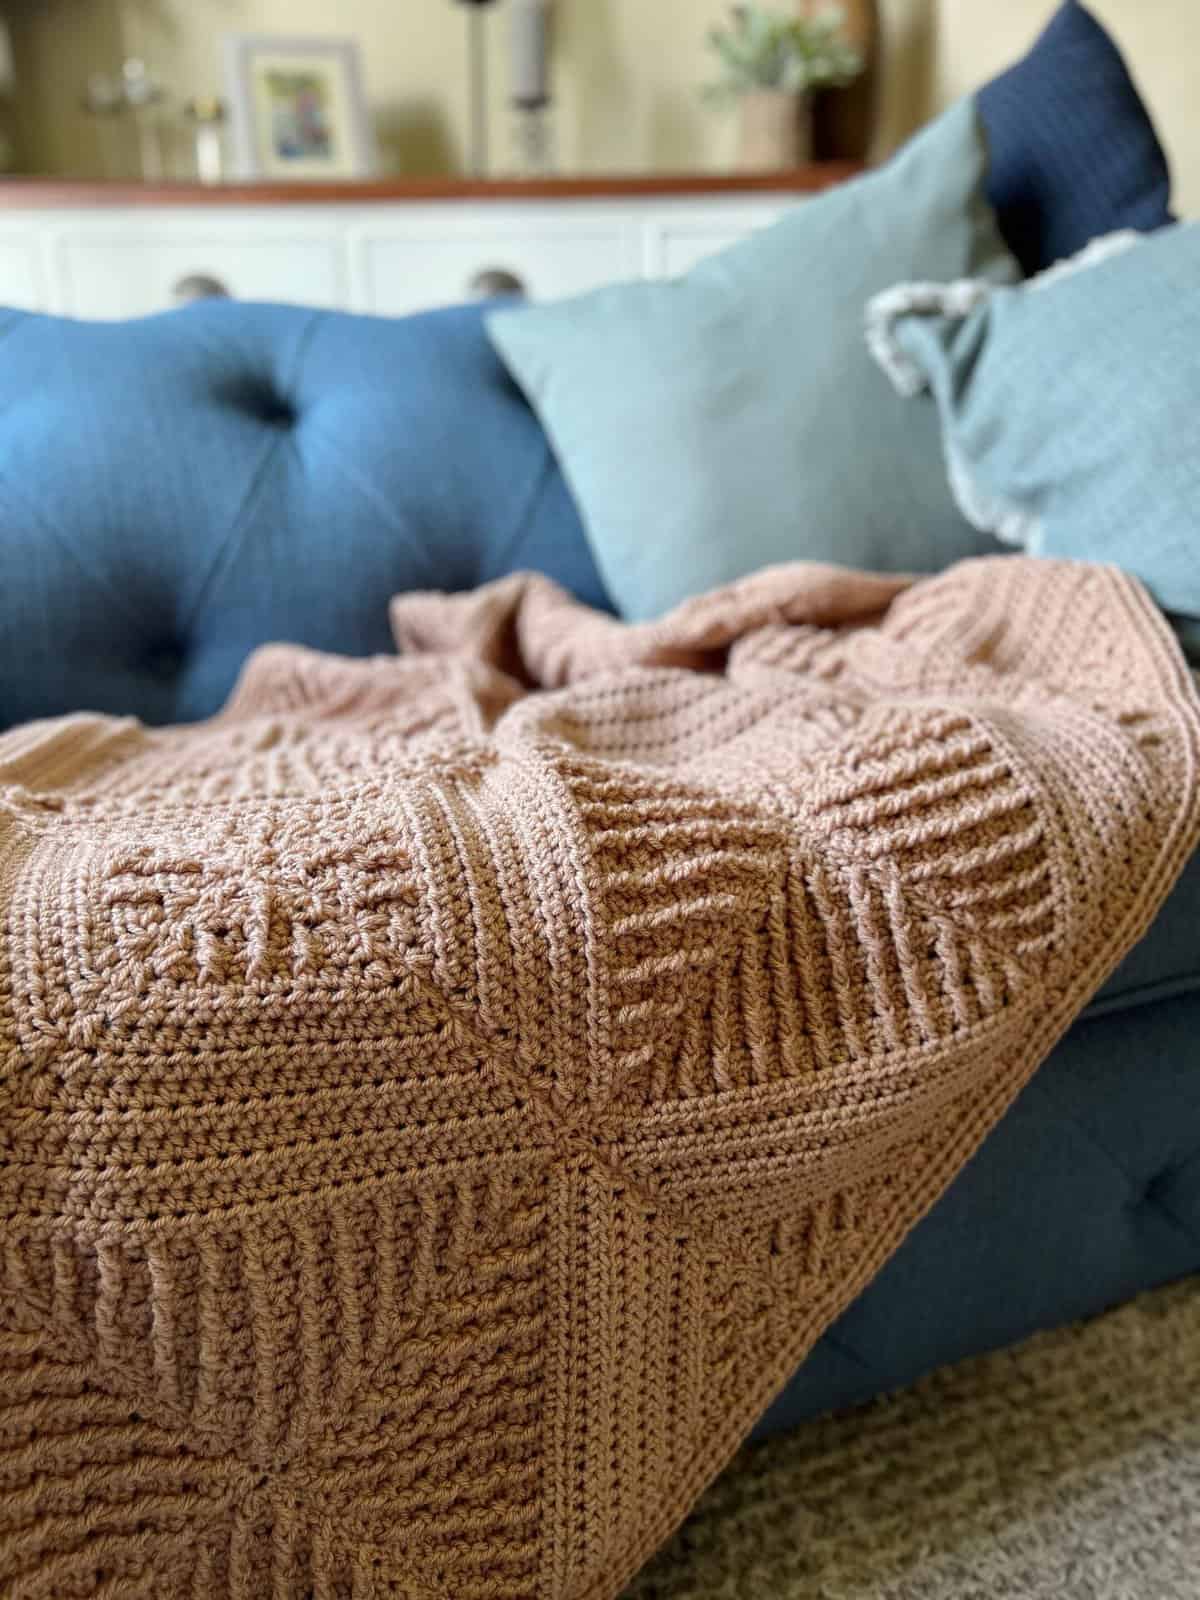 Crochet blanket using textured stitches laid on a sofa.